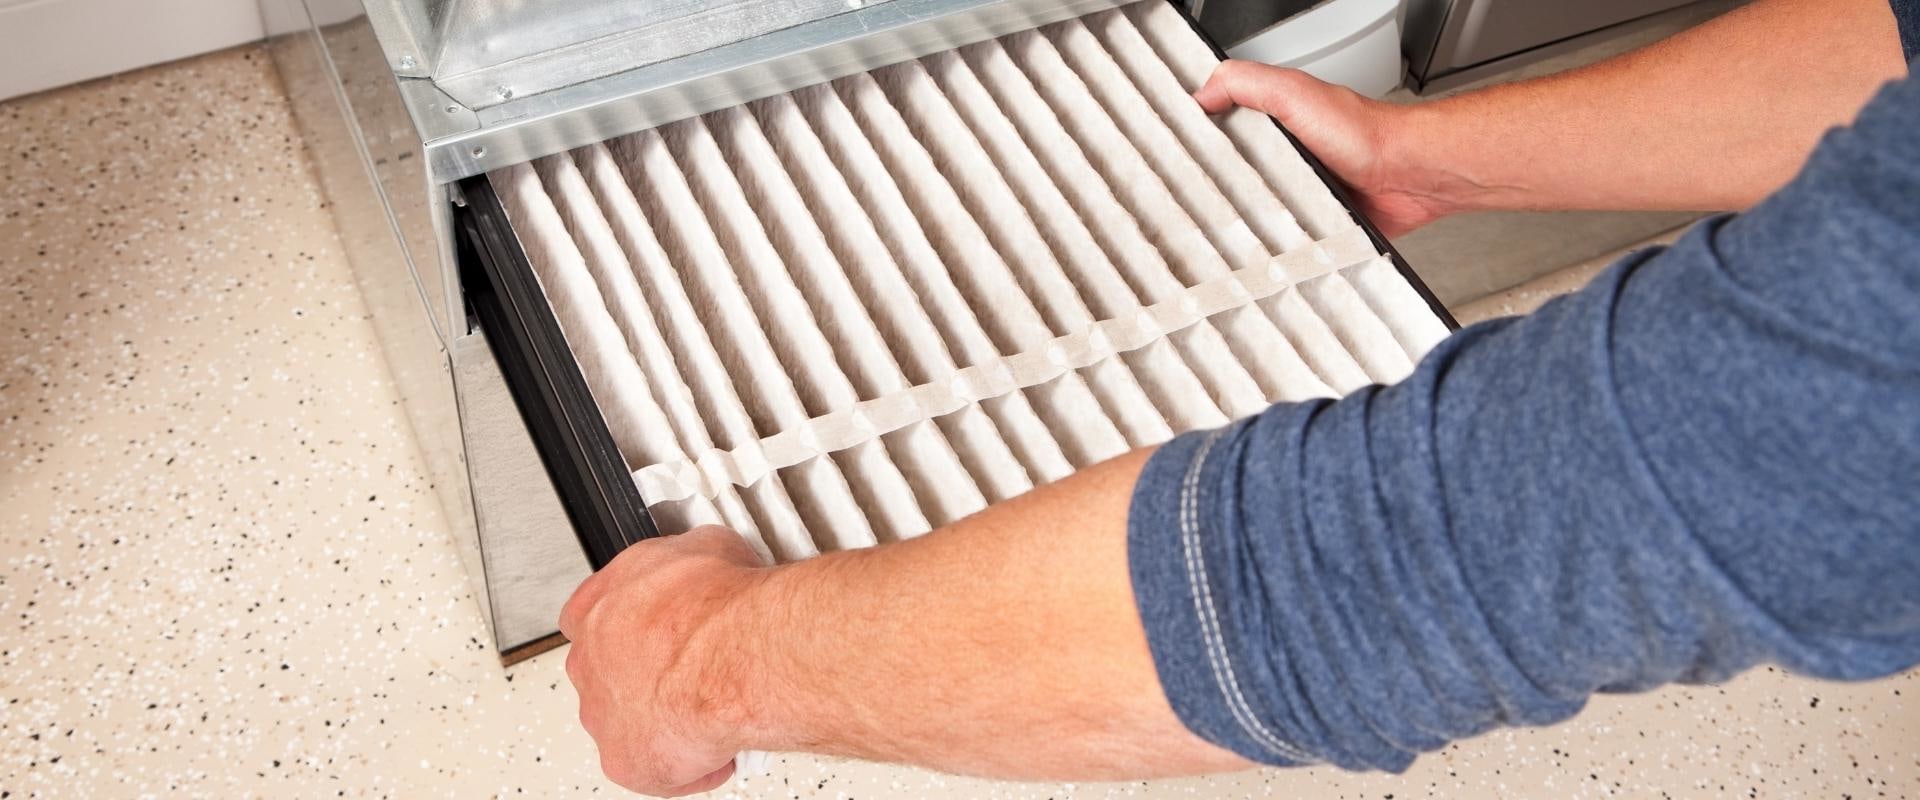 Finding an Air Filter Subscription Home Delivery Service